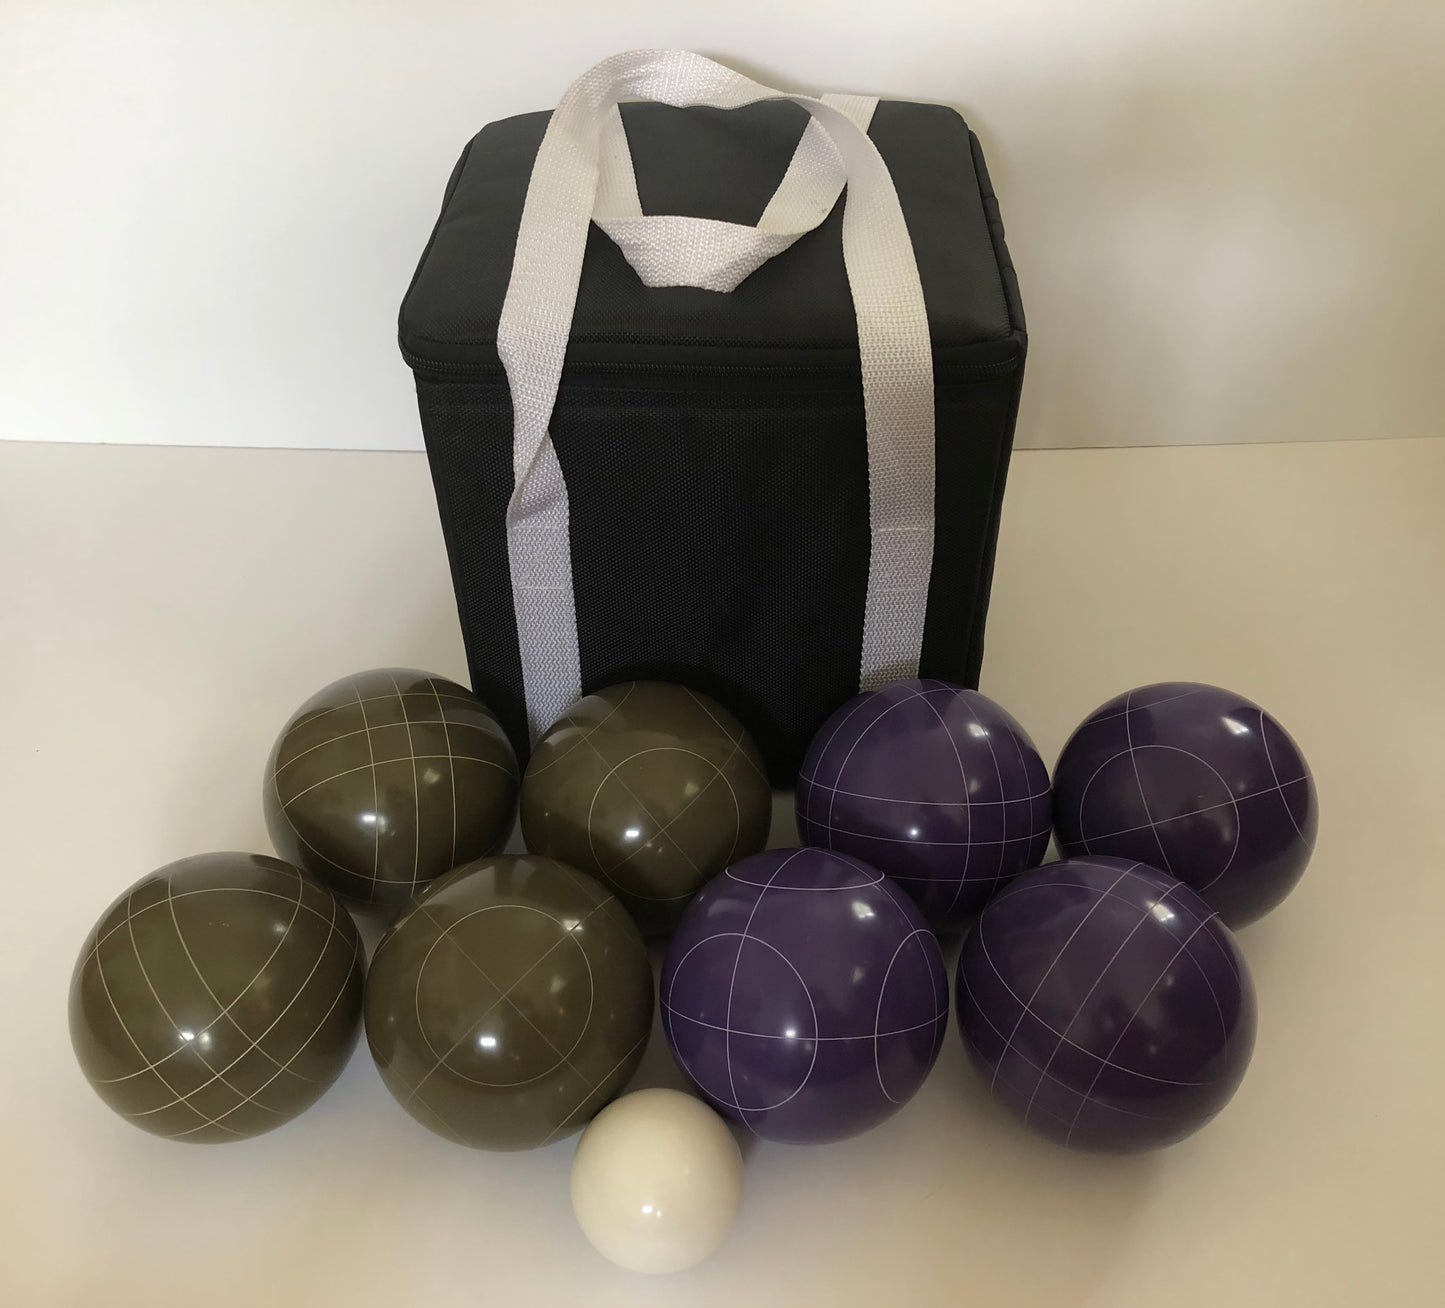 107mm Bocce Olive Brown and Purple Balls with Black Bag